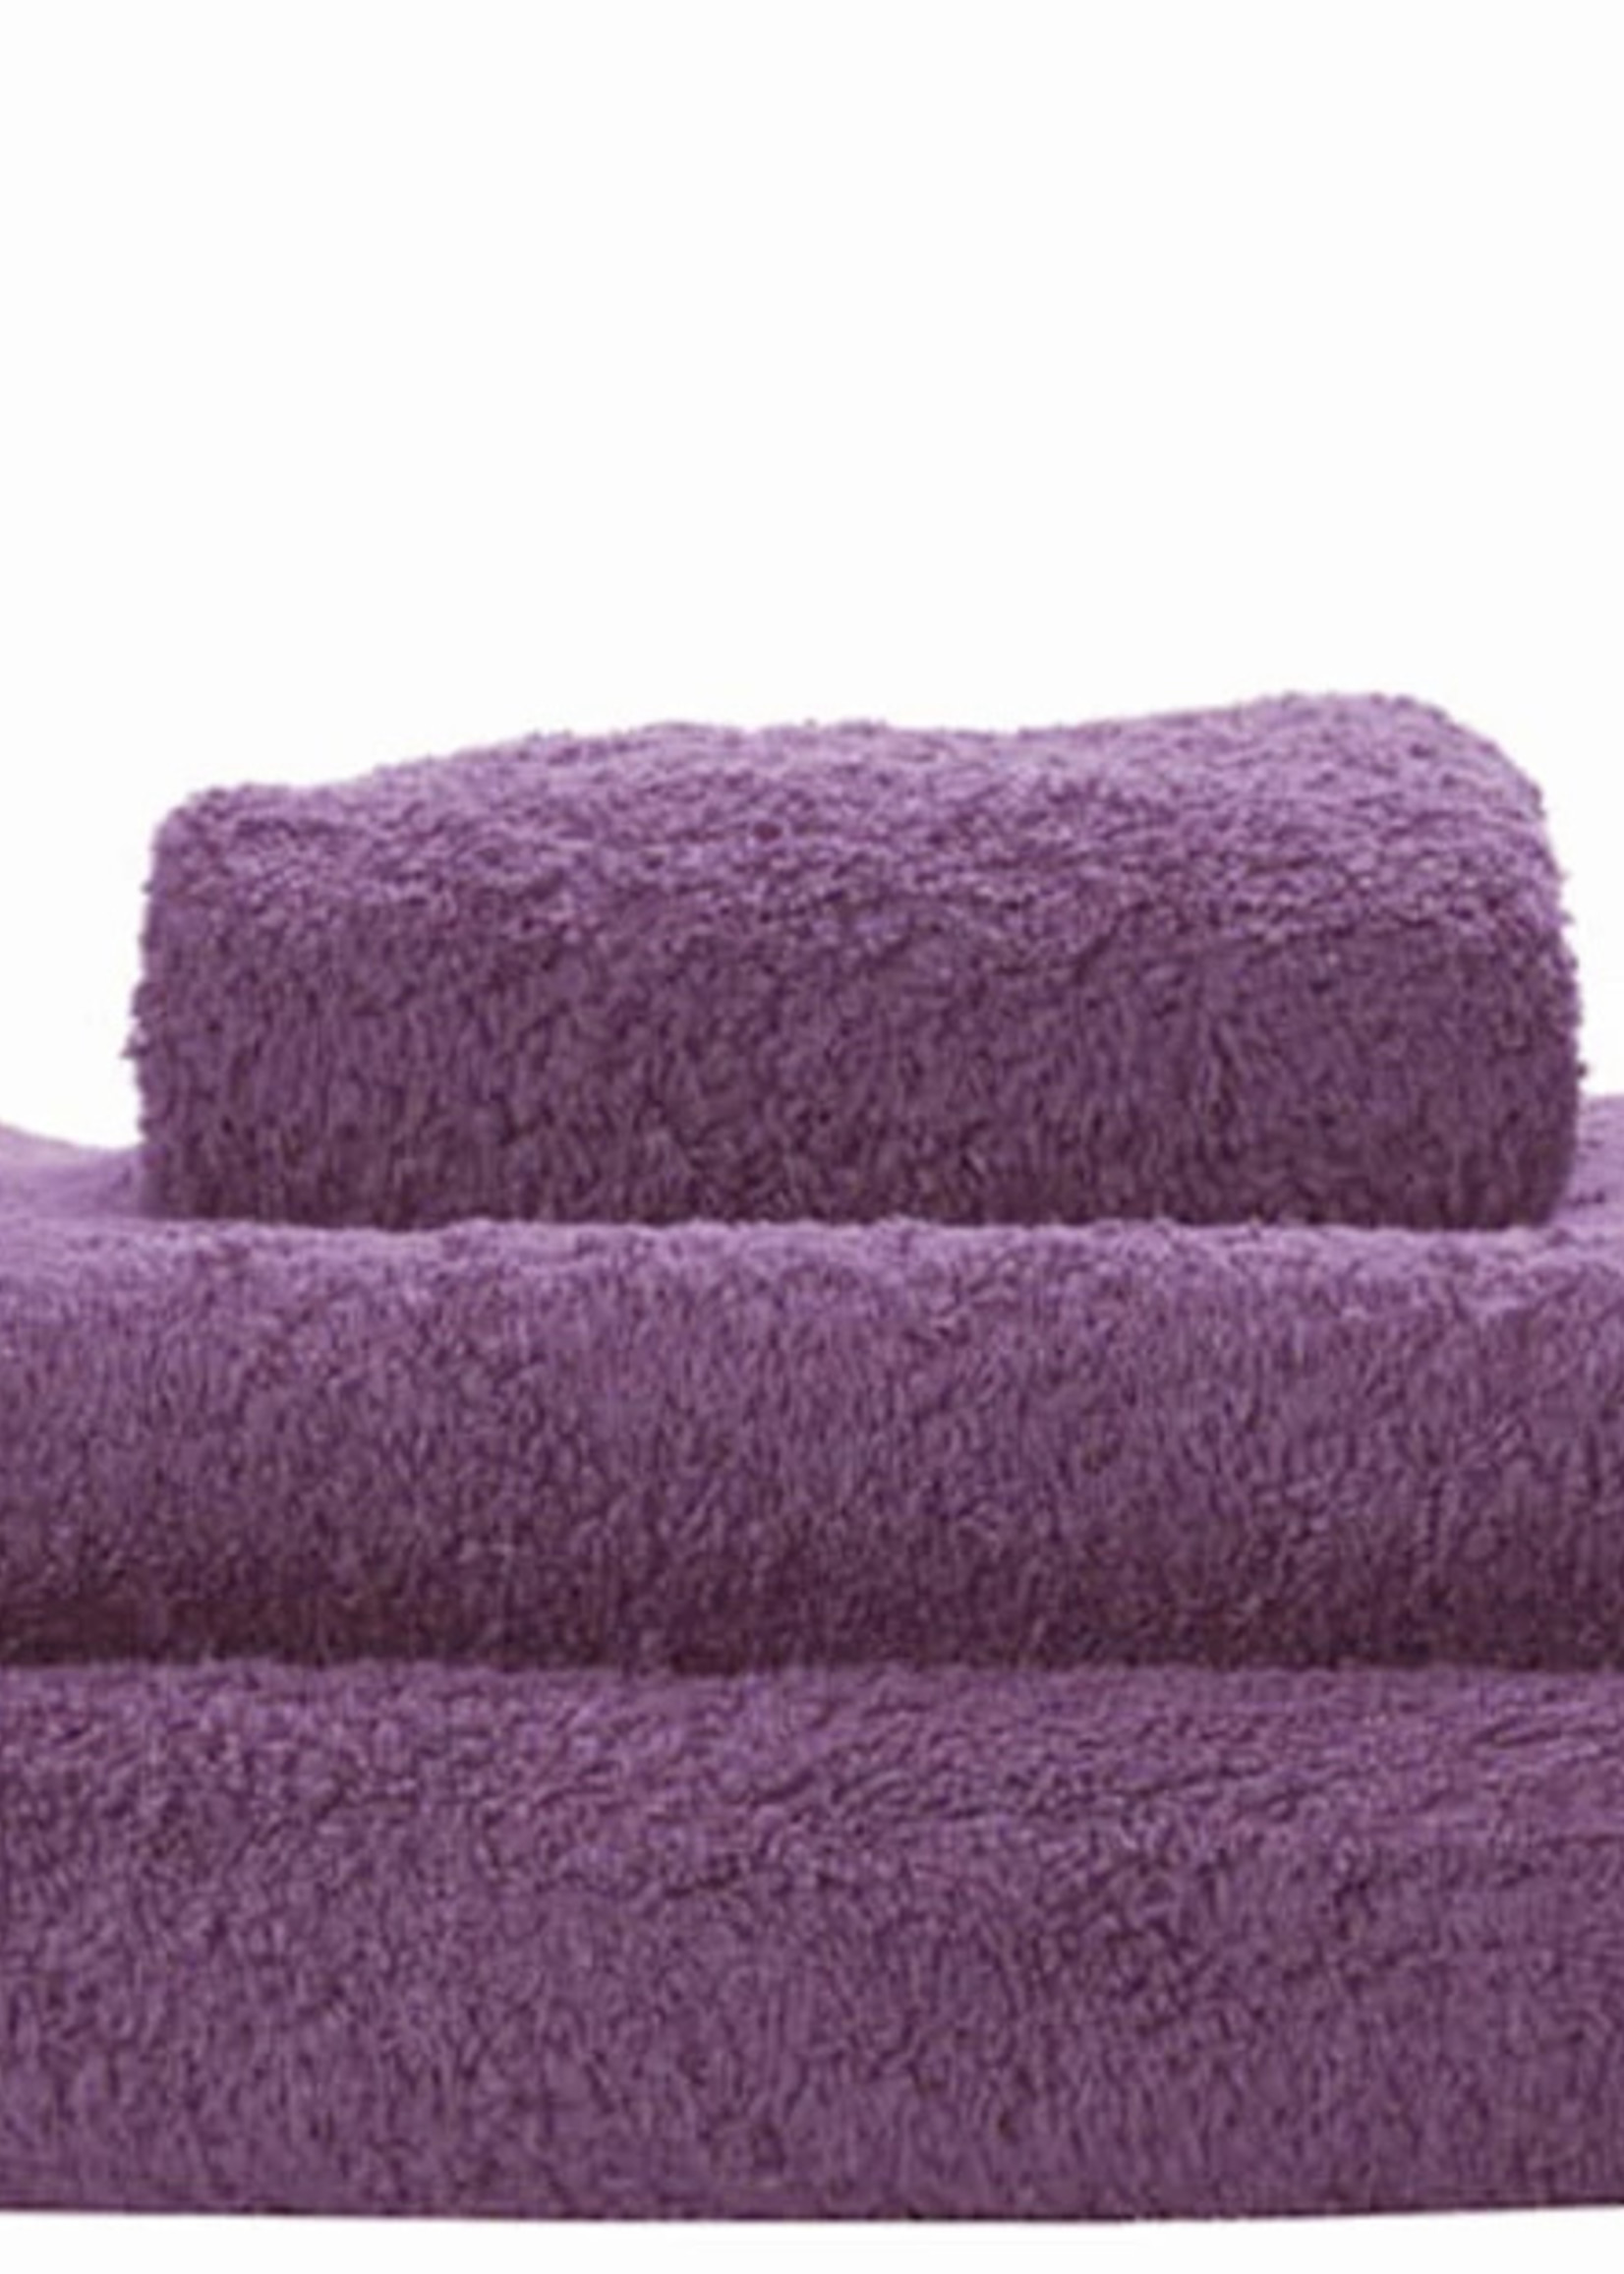 Abyss & Habidecor ‐ Super Pile Bath Towels By Abyss and Habidecor ‐ Pioneer  Linens